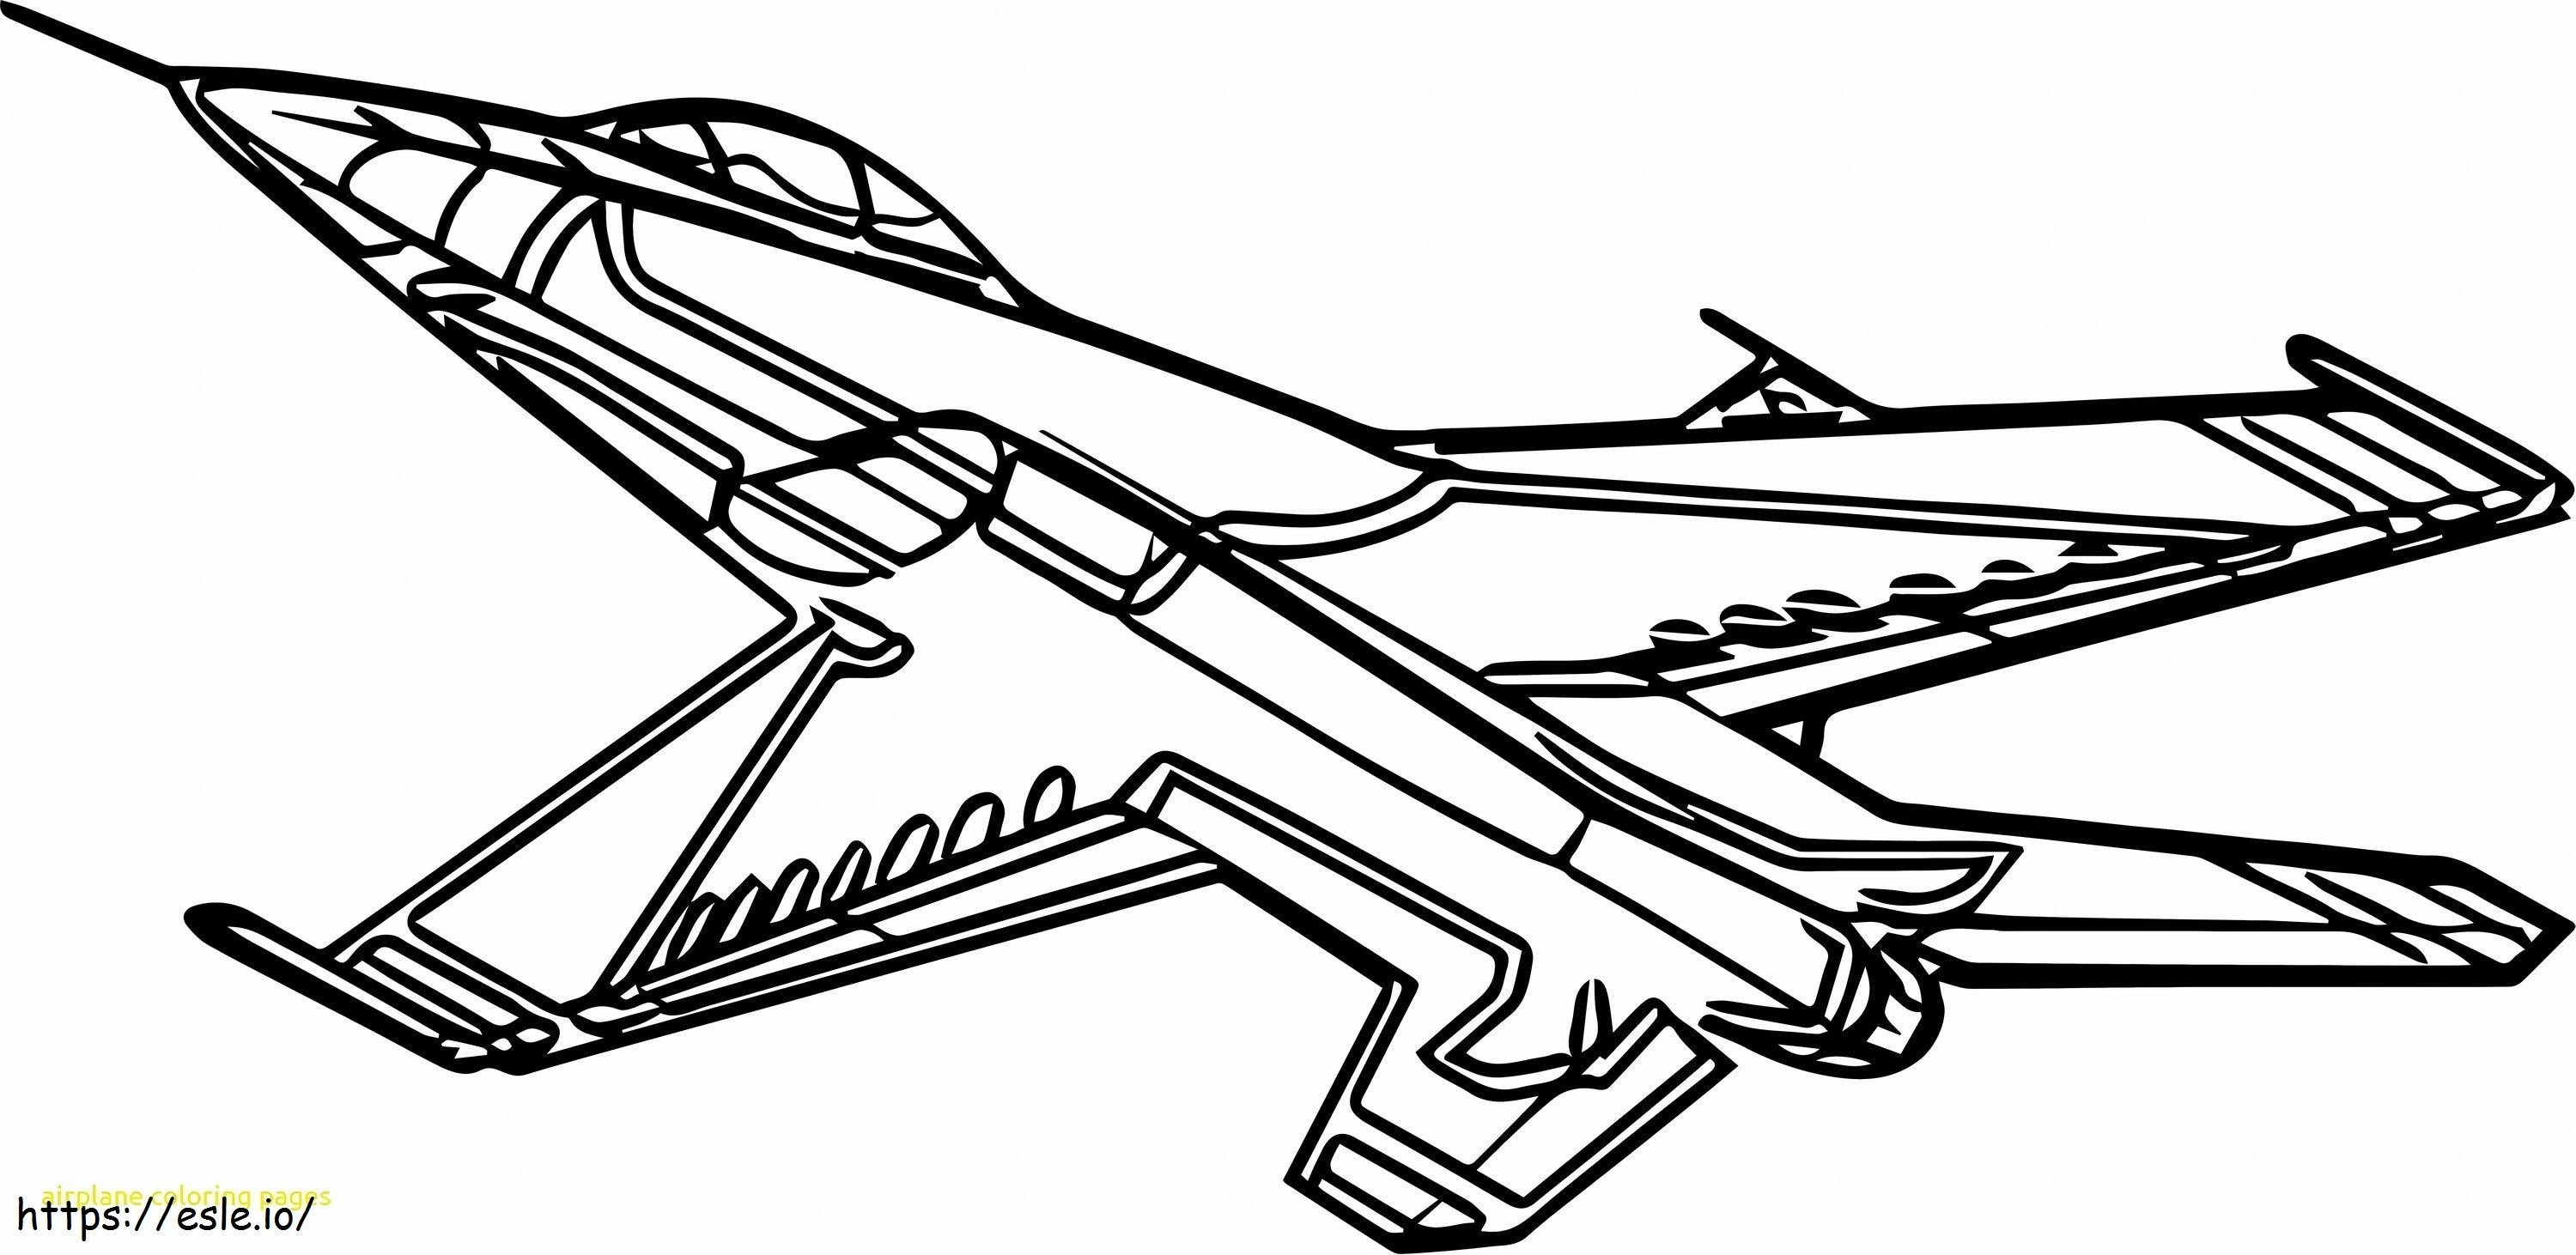 1539399824 Successful Airplane Page With F 26190 Unknown Airplane coloring page